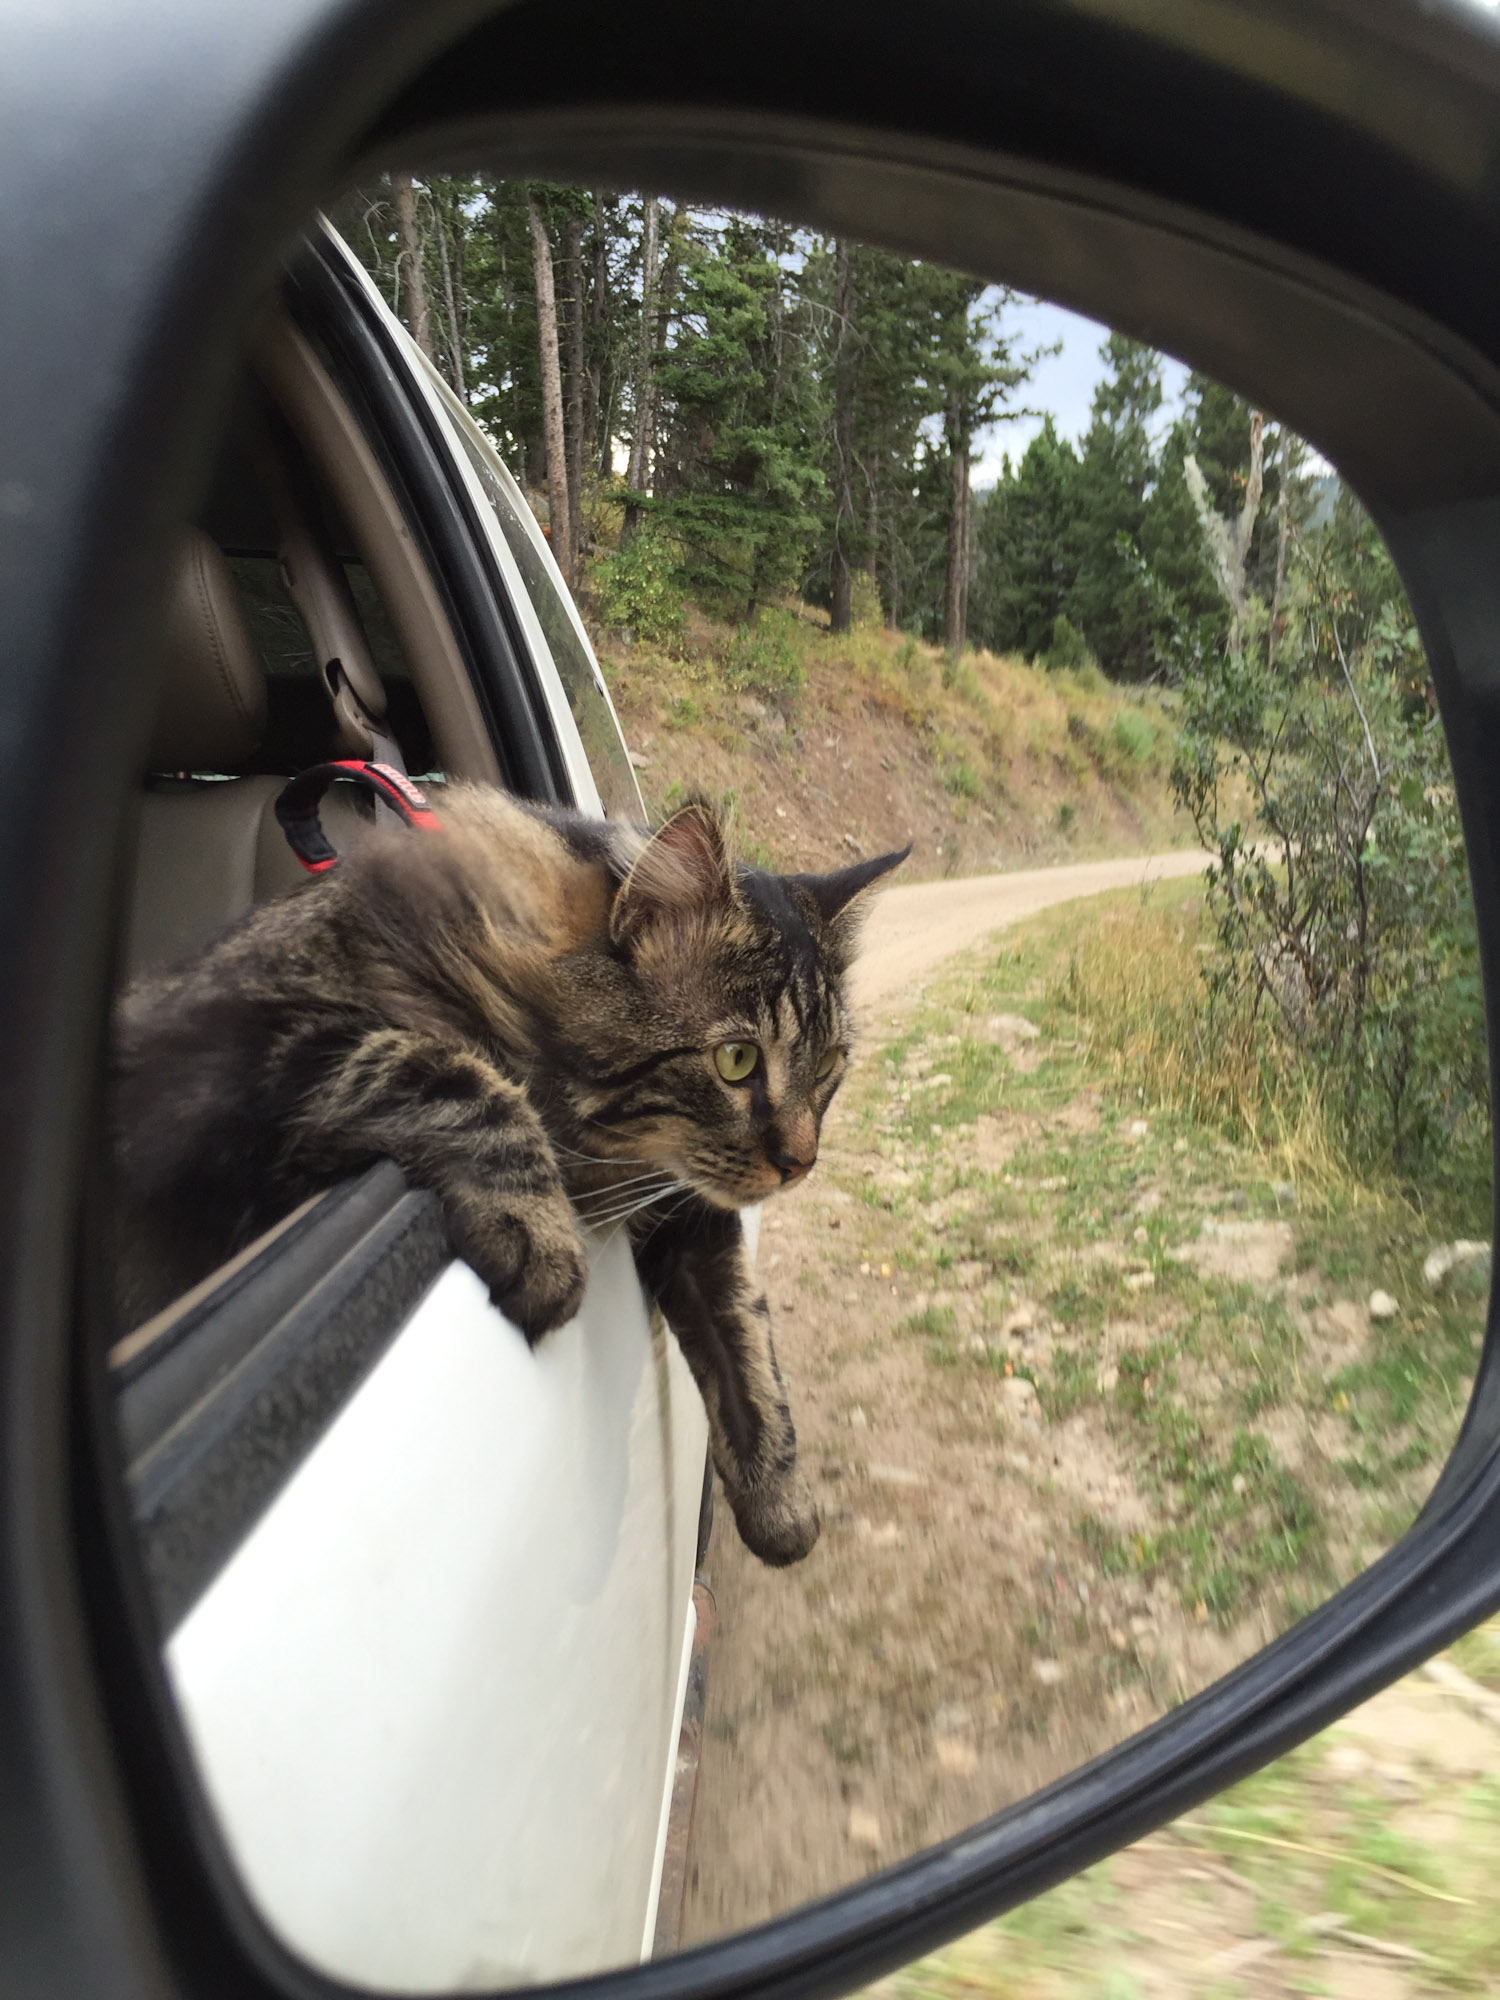 Otie the adventure cat leaning out car window